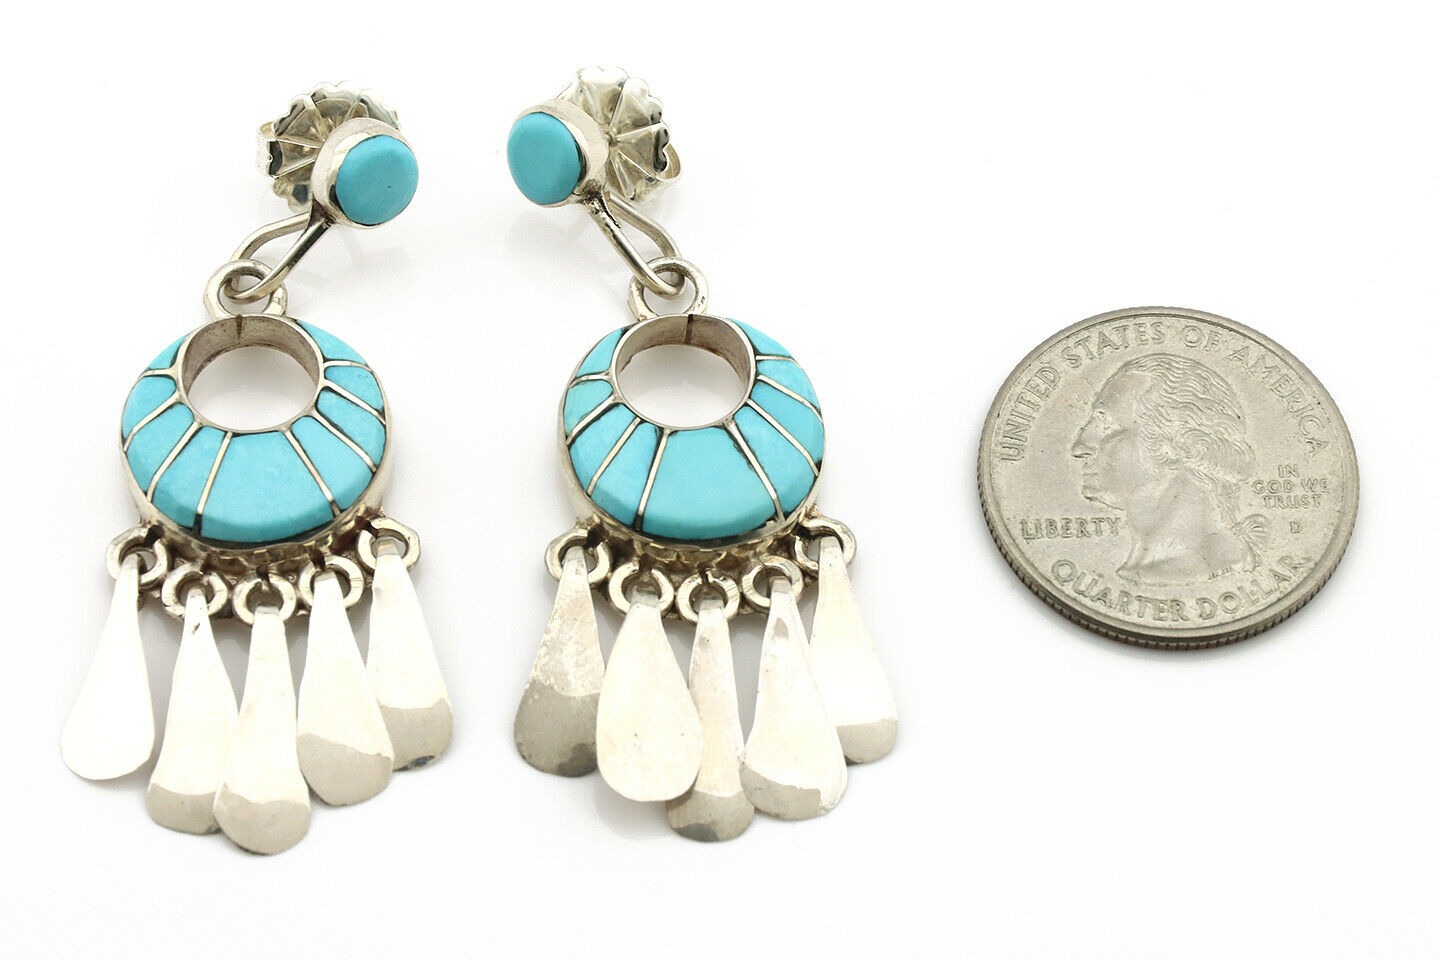 Zuni Earrings .925 Silver Inlaid Blue Turquoise Artist Native C.80